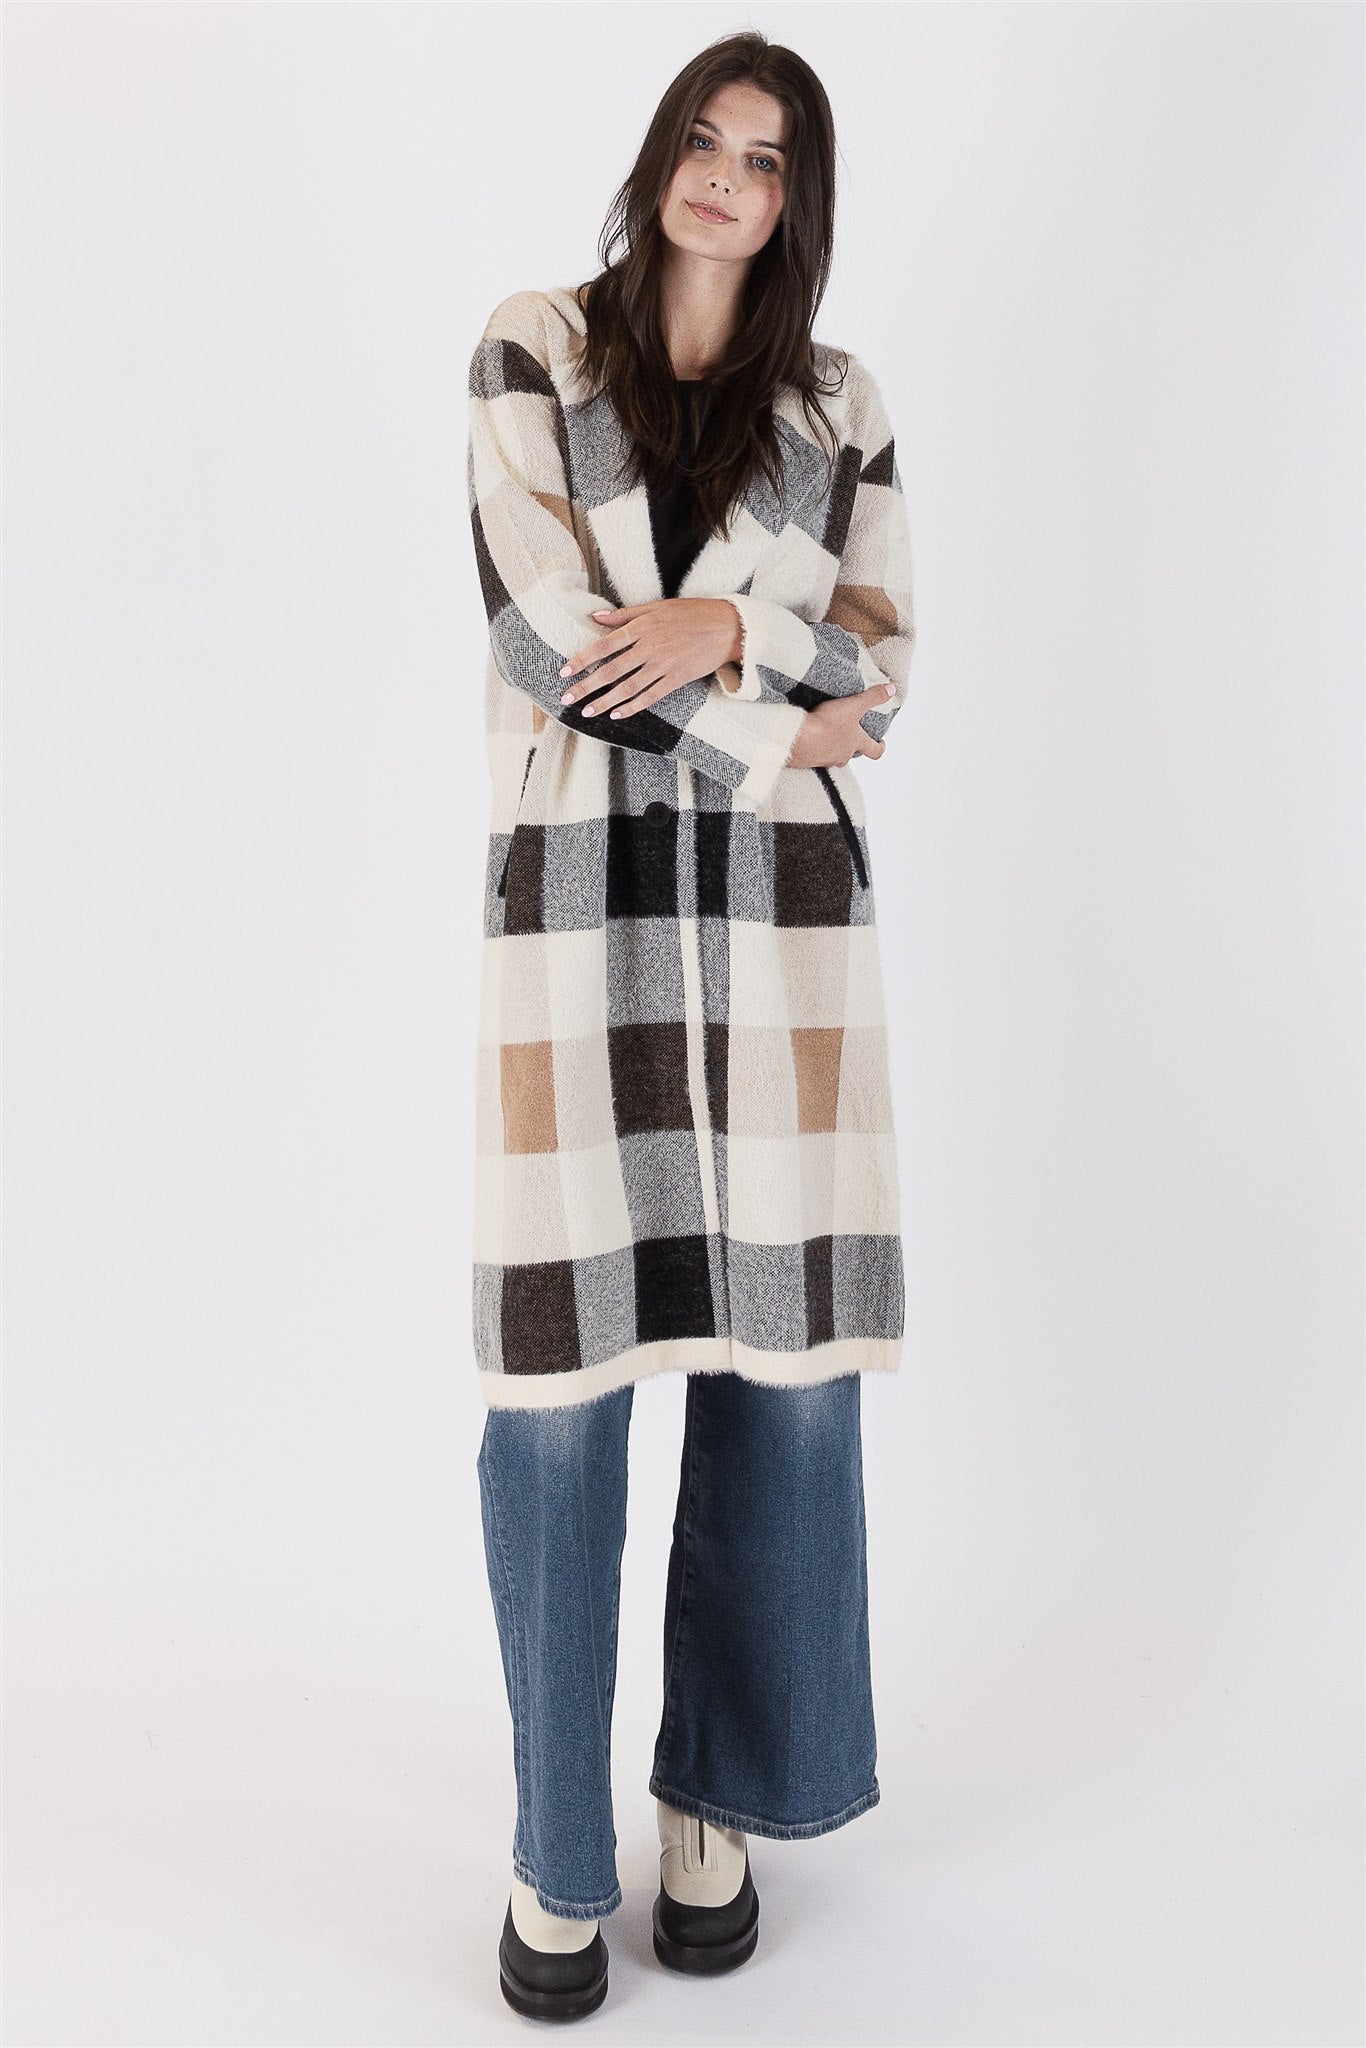 Lyla+Luxe Coat - William Check - Natural